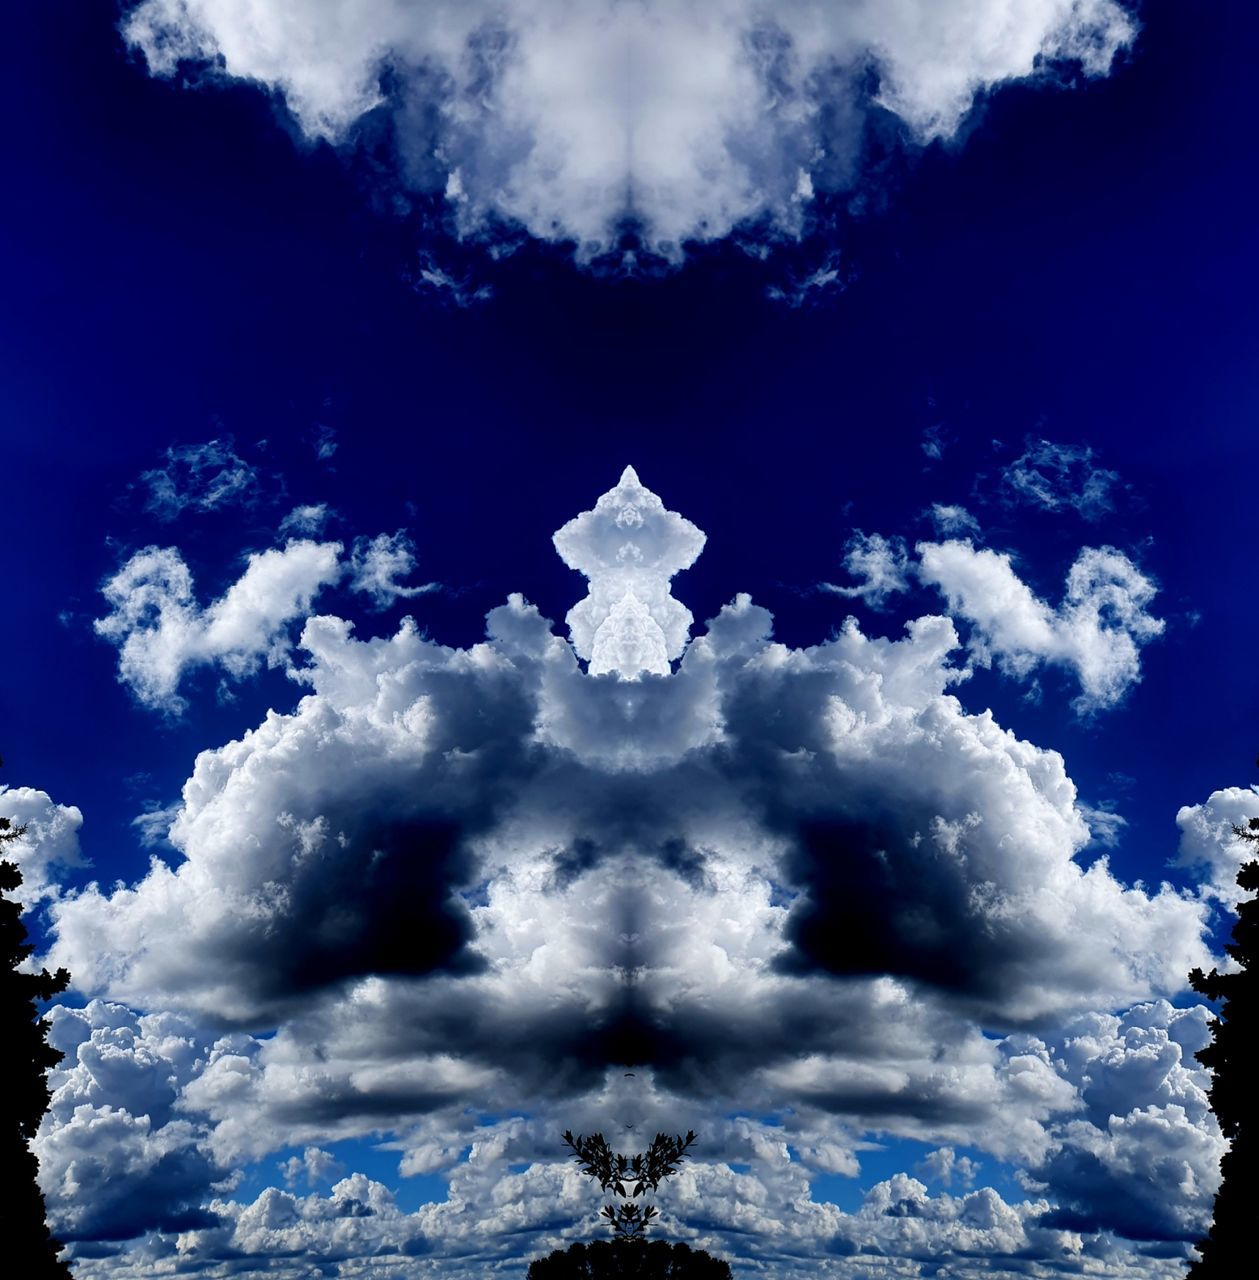 sky, cloud, blue, nature, religion, no people, digital composite, outdoors, spirituality, belief, tree, cloudscape, environment, low angle view